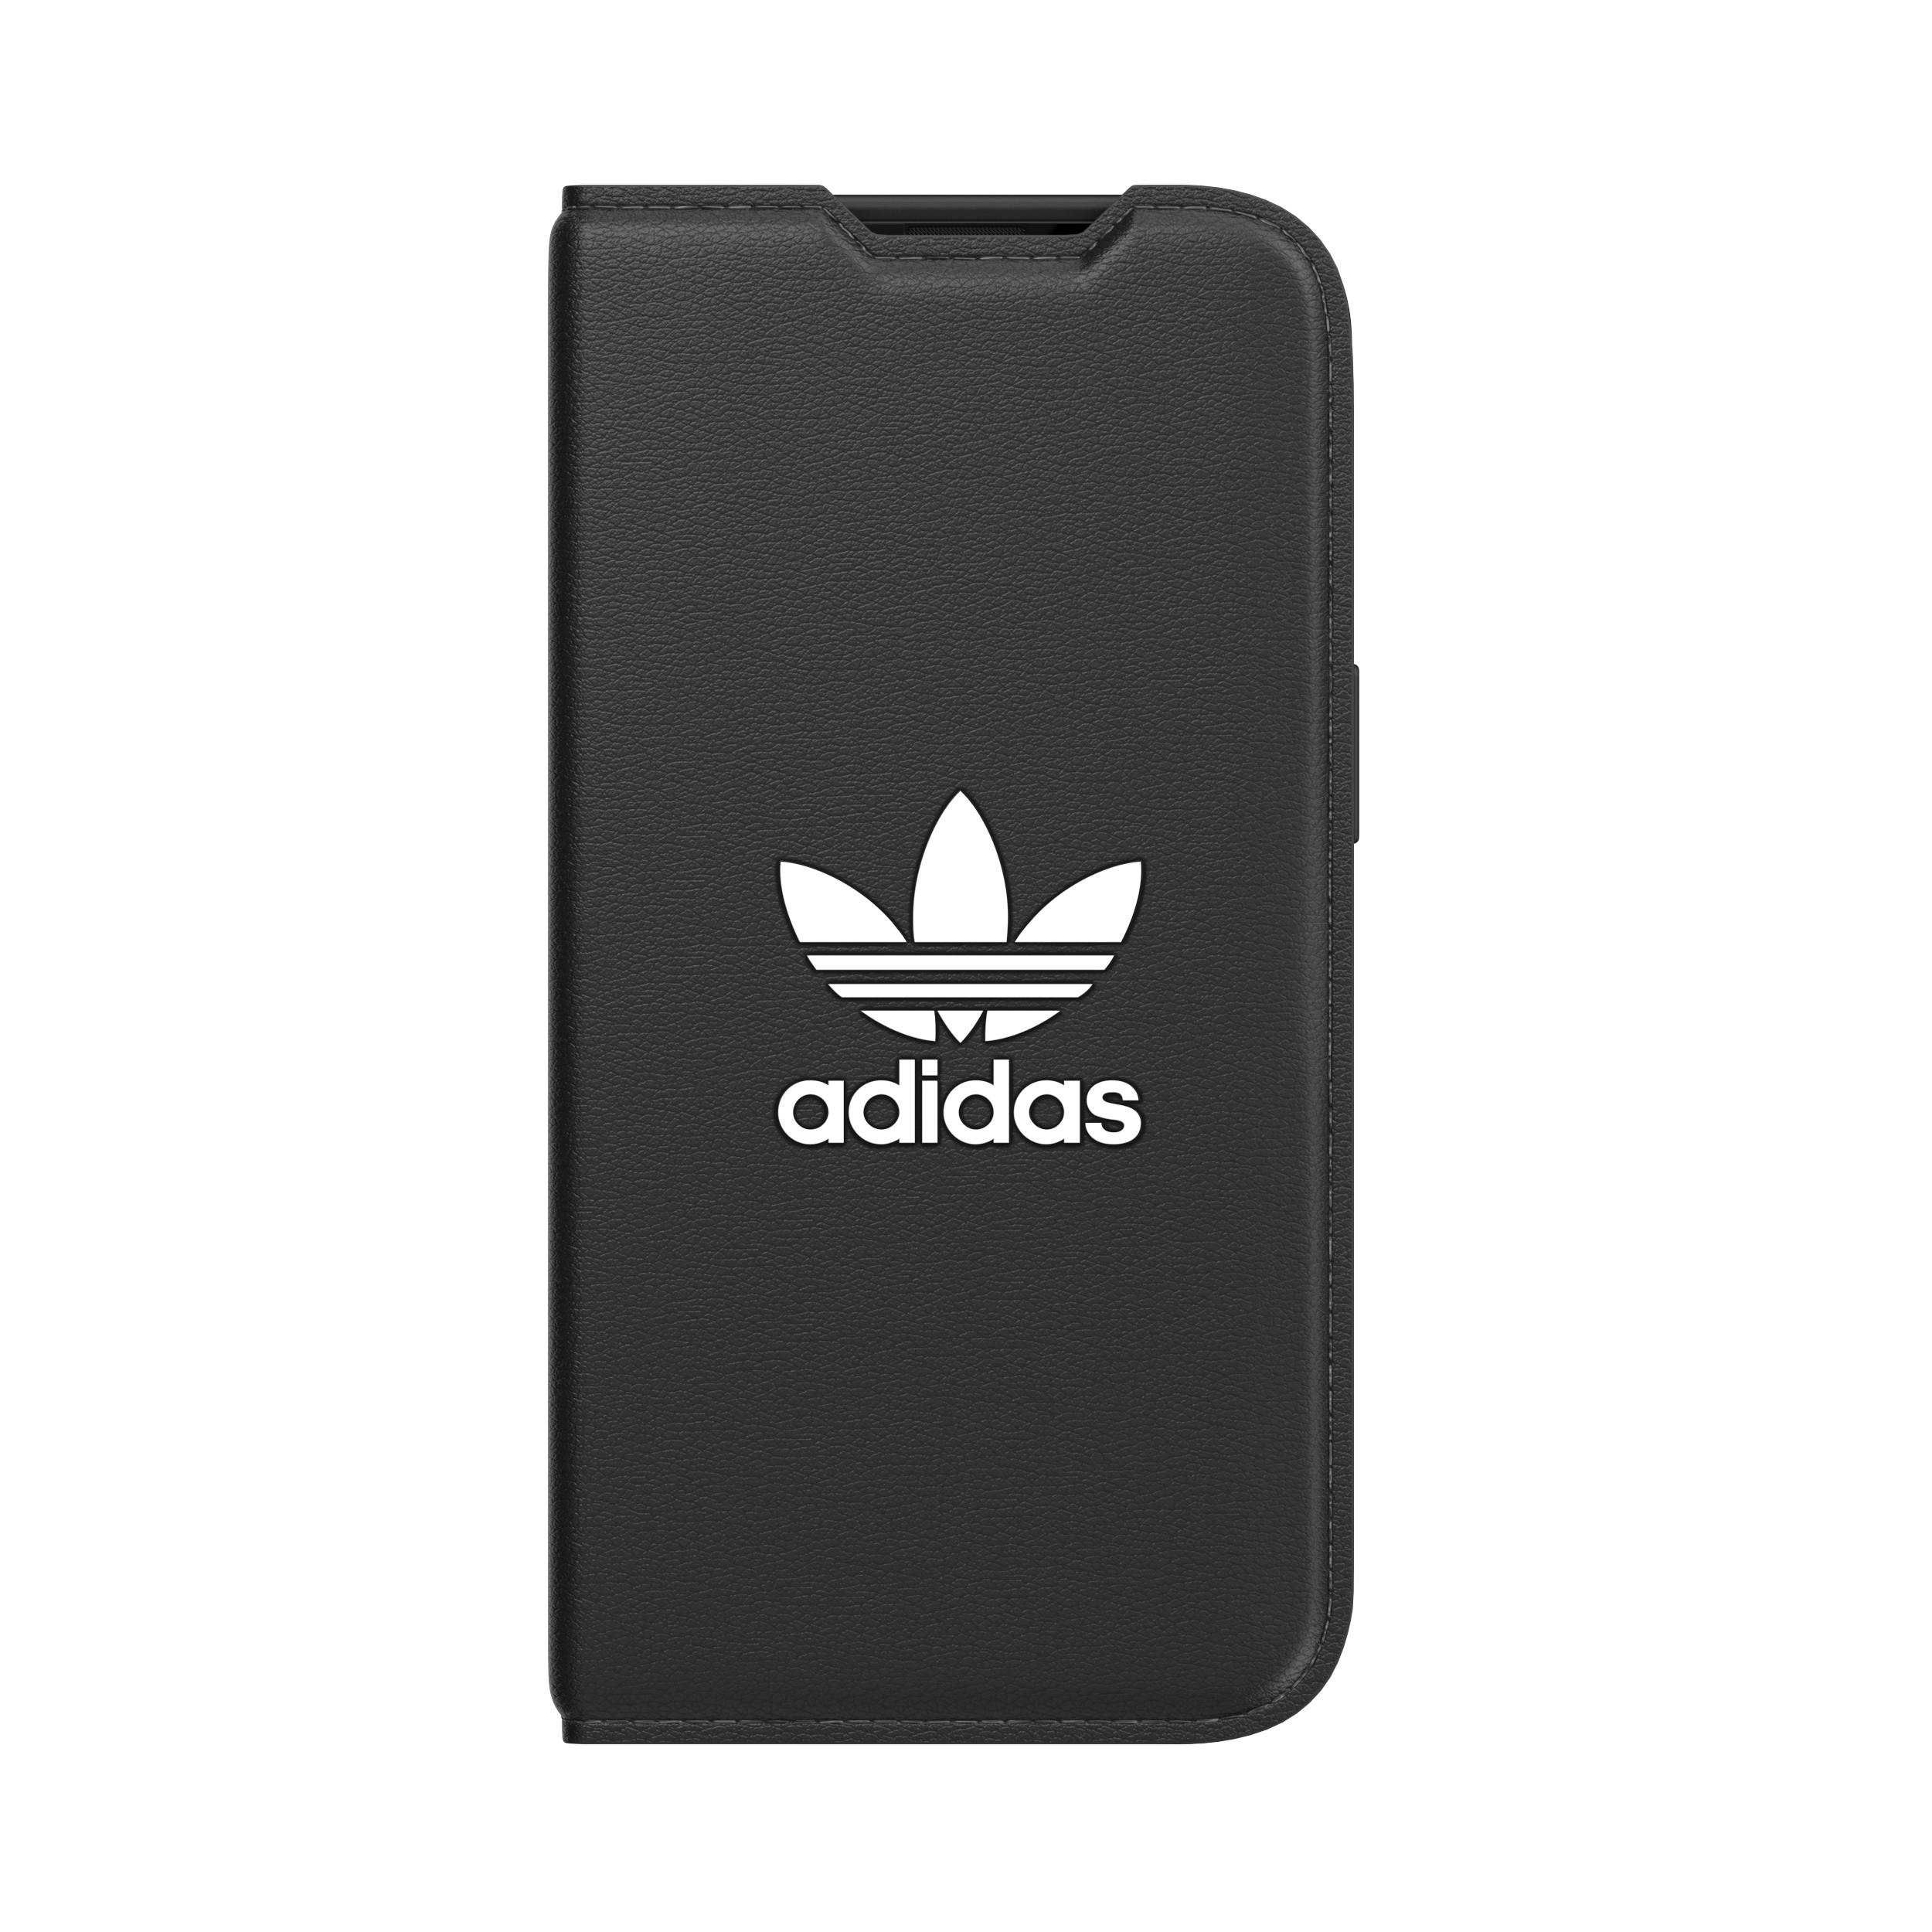 Booklet 14, Bookcover, Case BLACK BASIC, ADIDAS APPLE, IPHONE